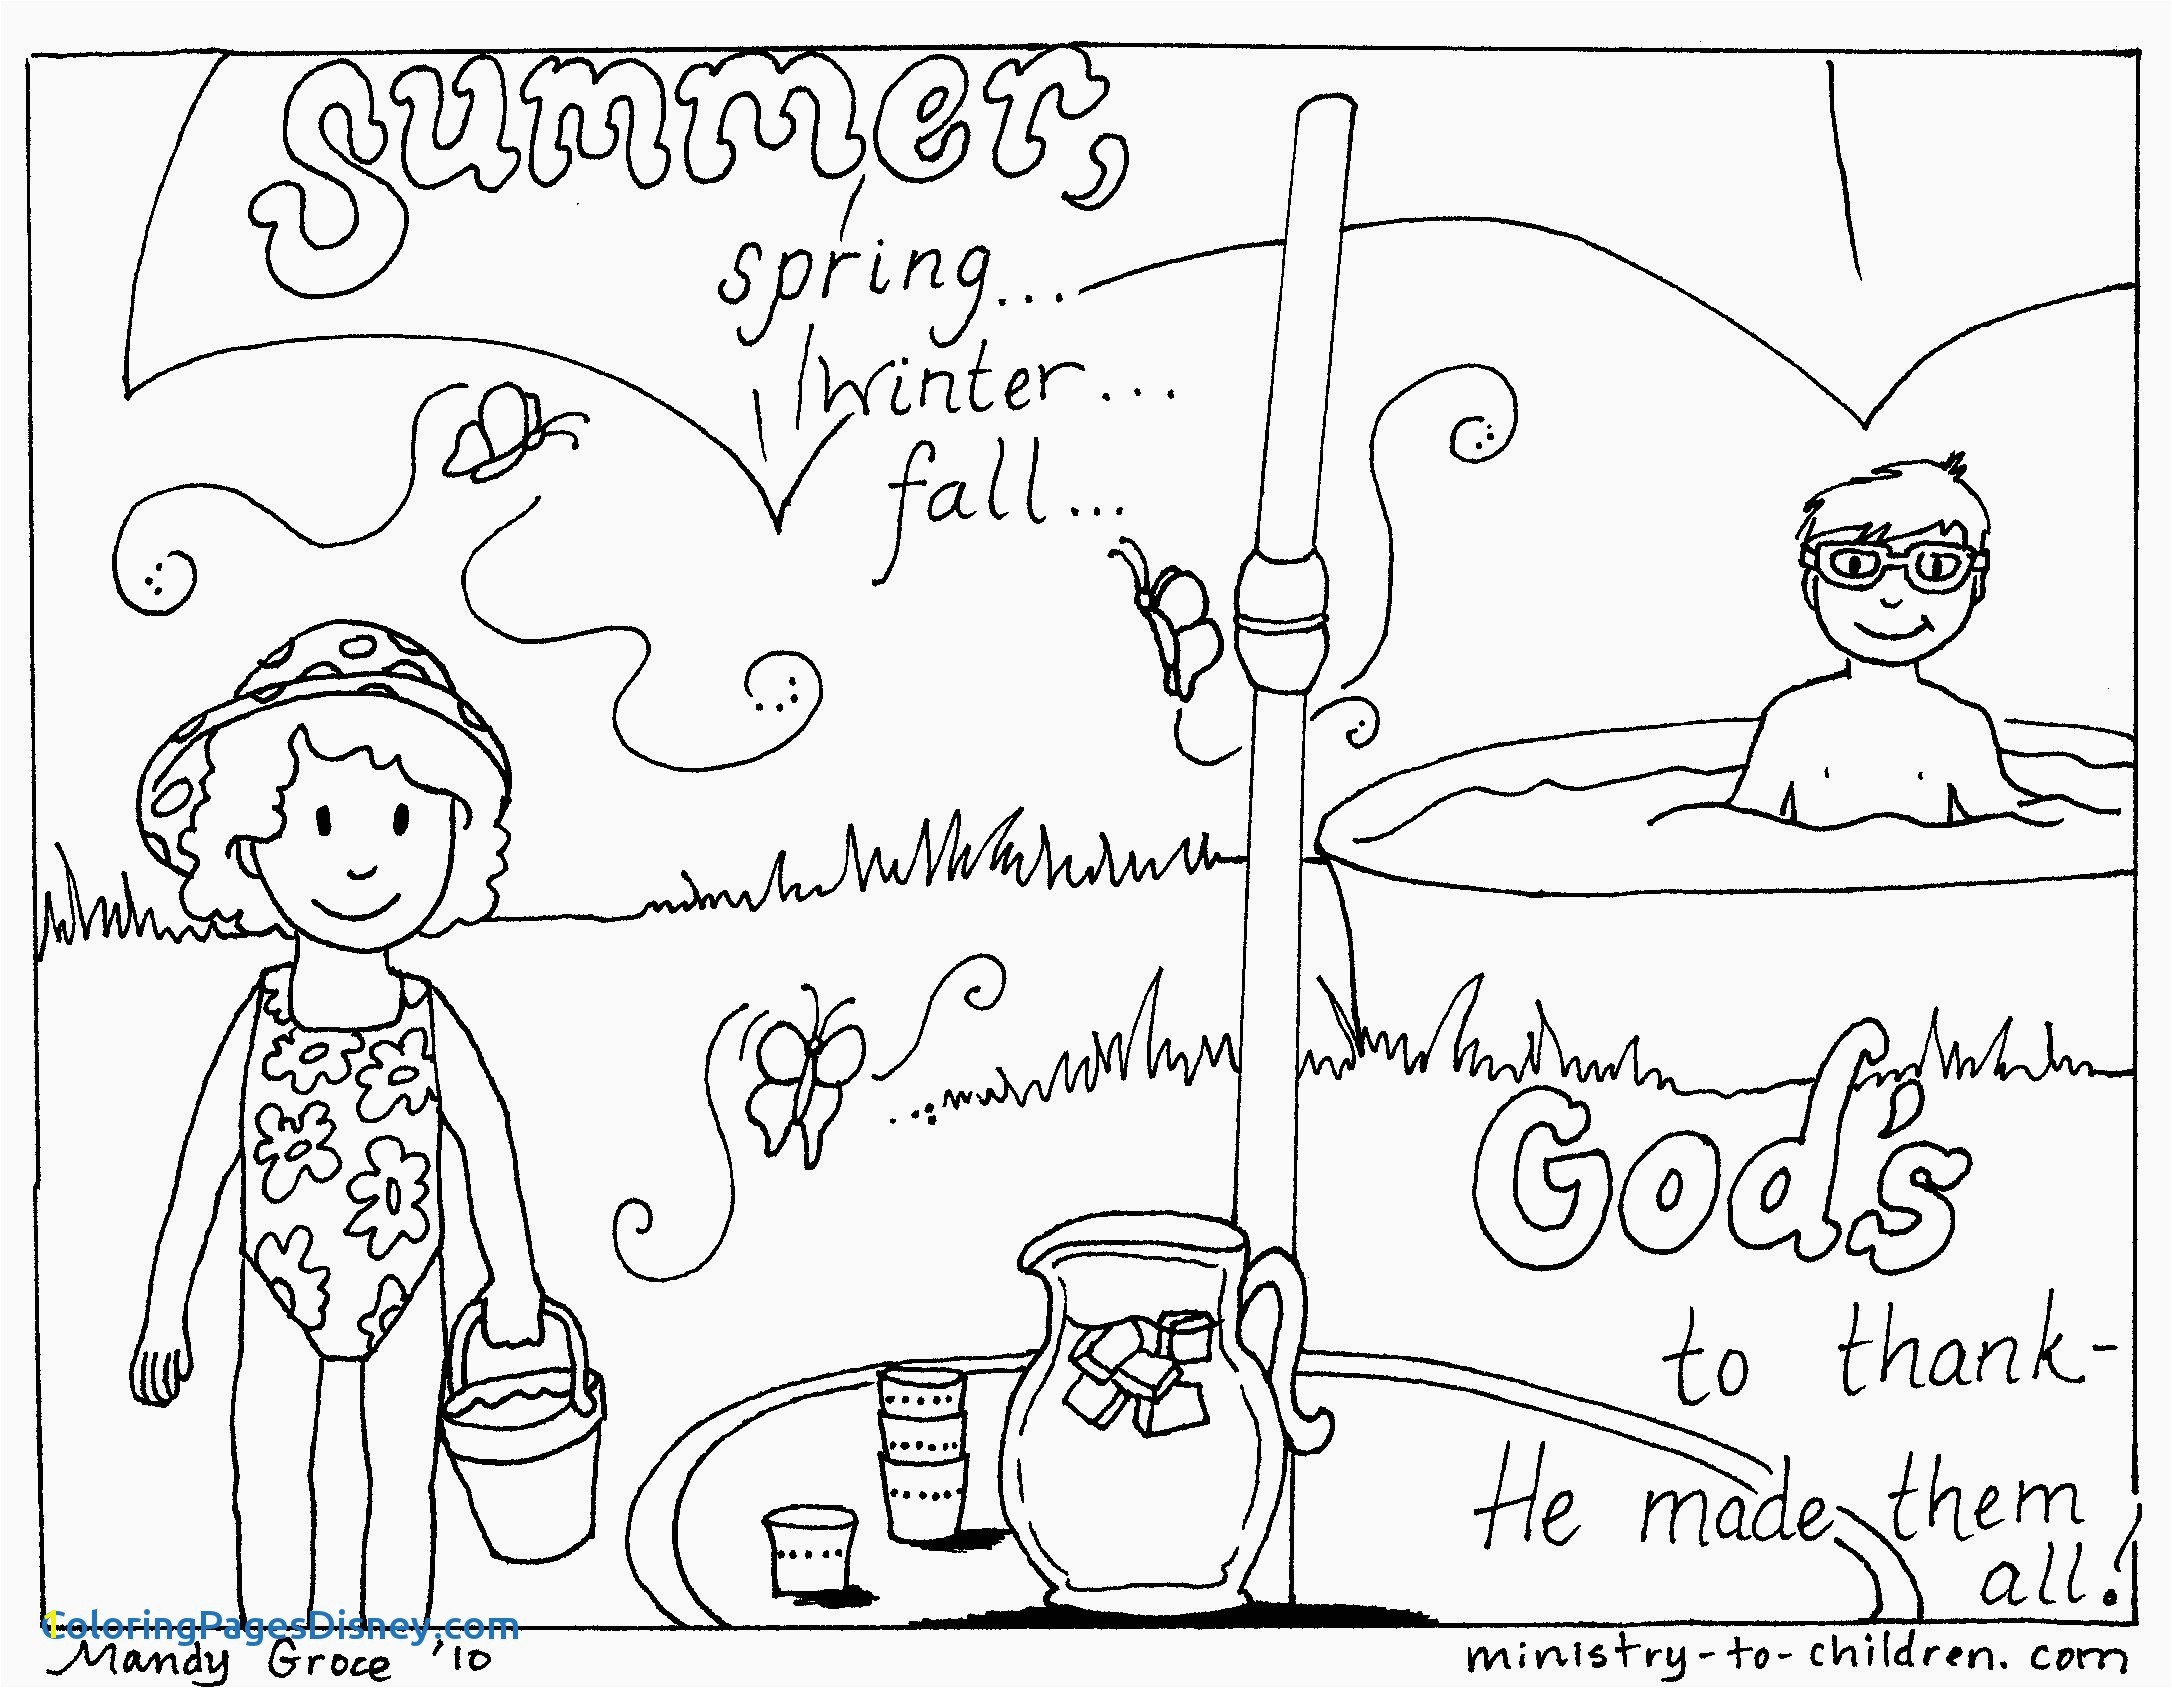 cheetah coloring sheet cheetah coloring page unique summer coloring pages best printable cds 0d coloring pages disney